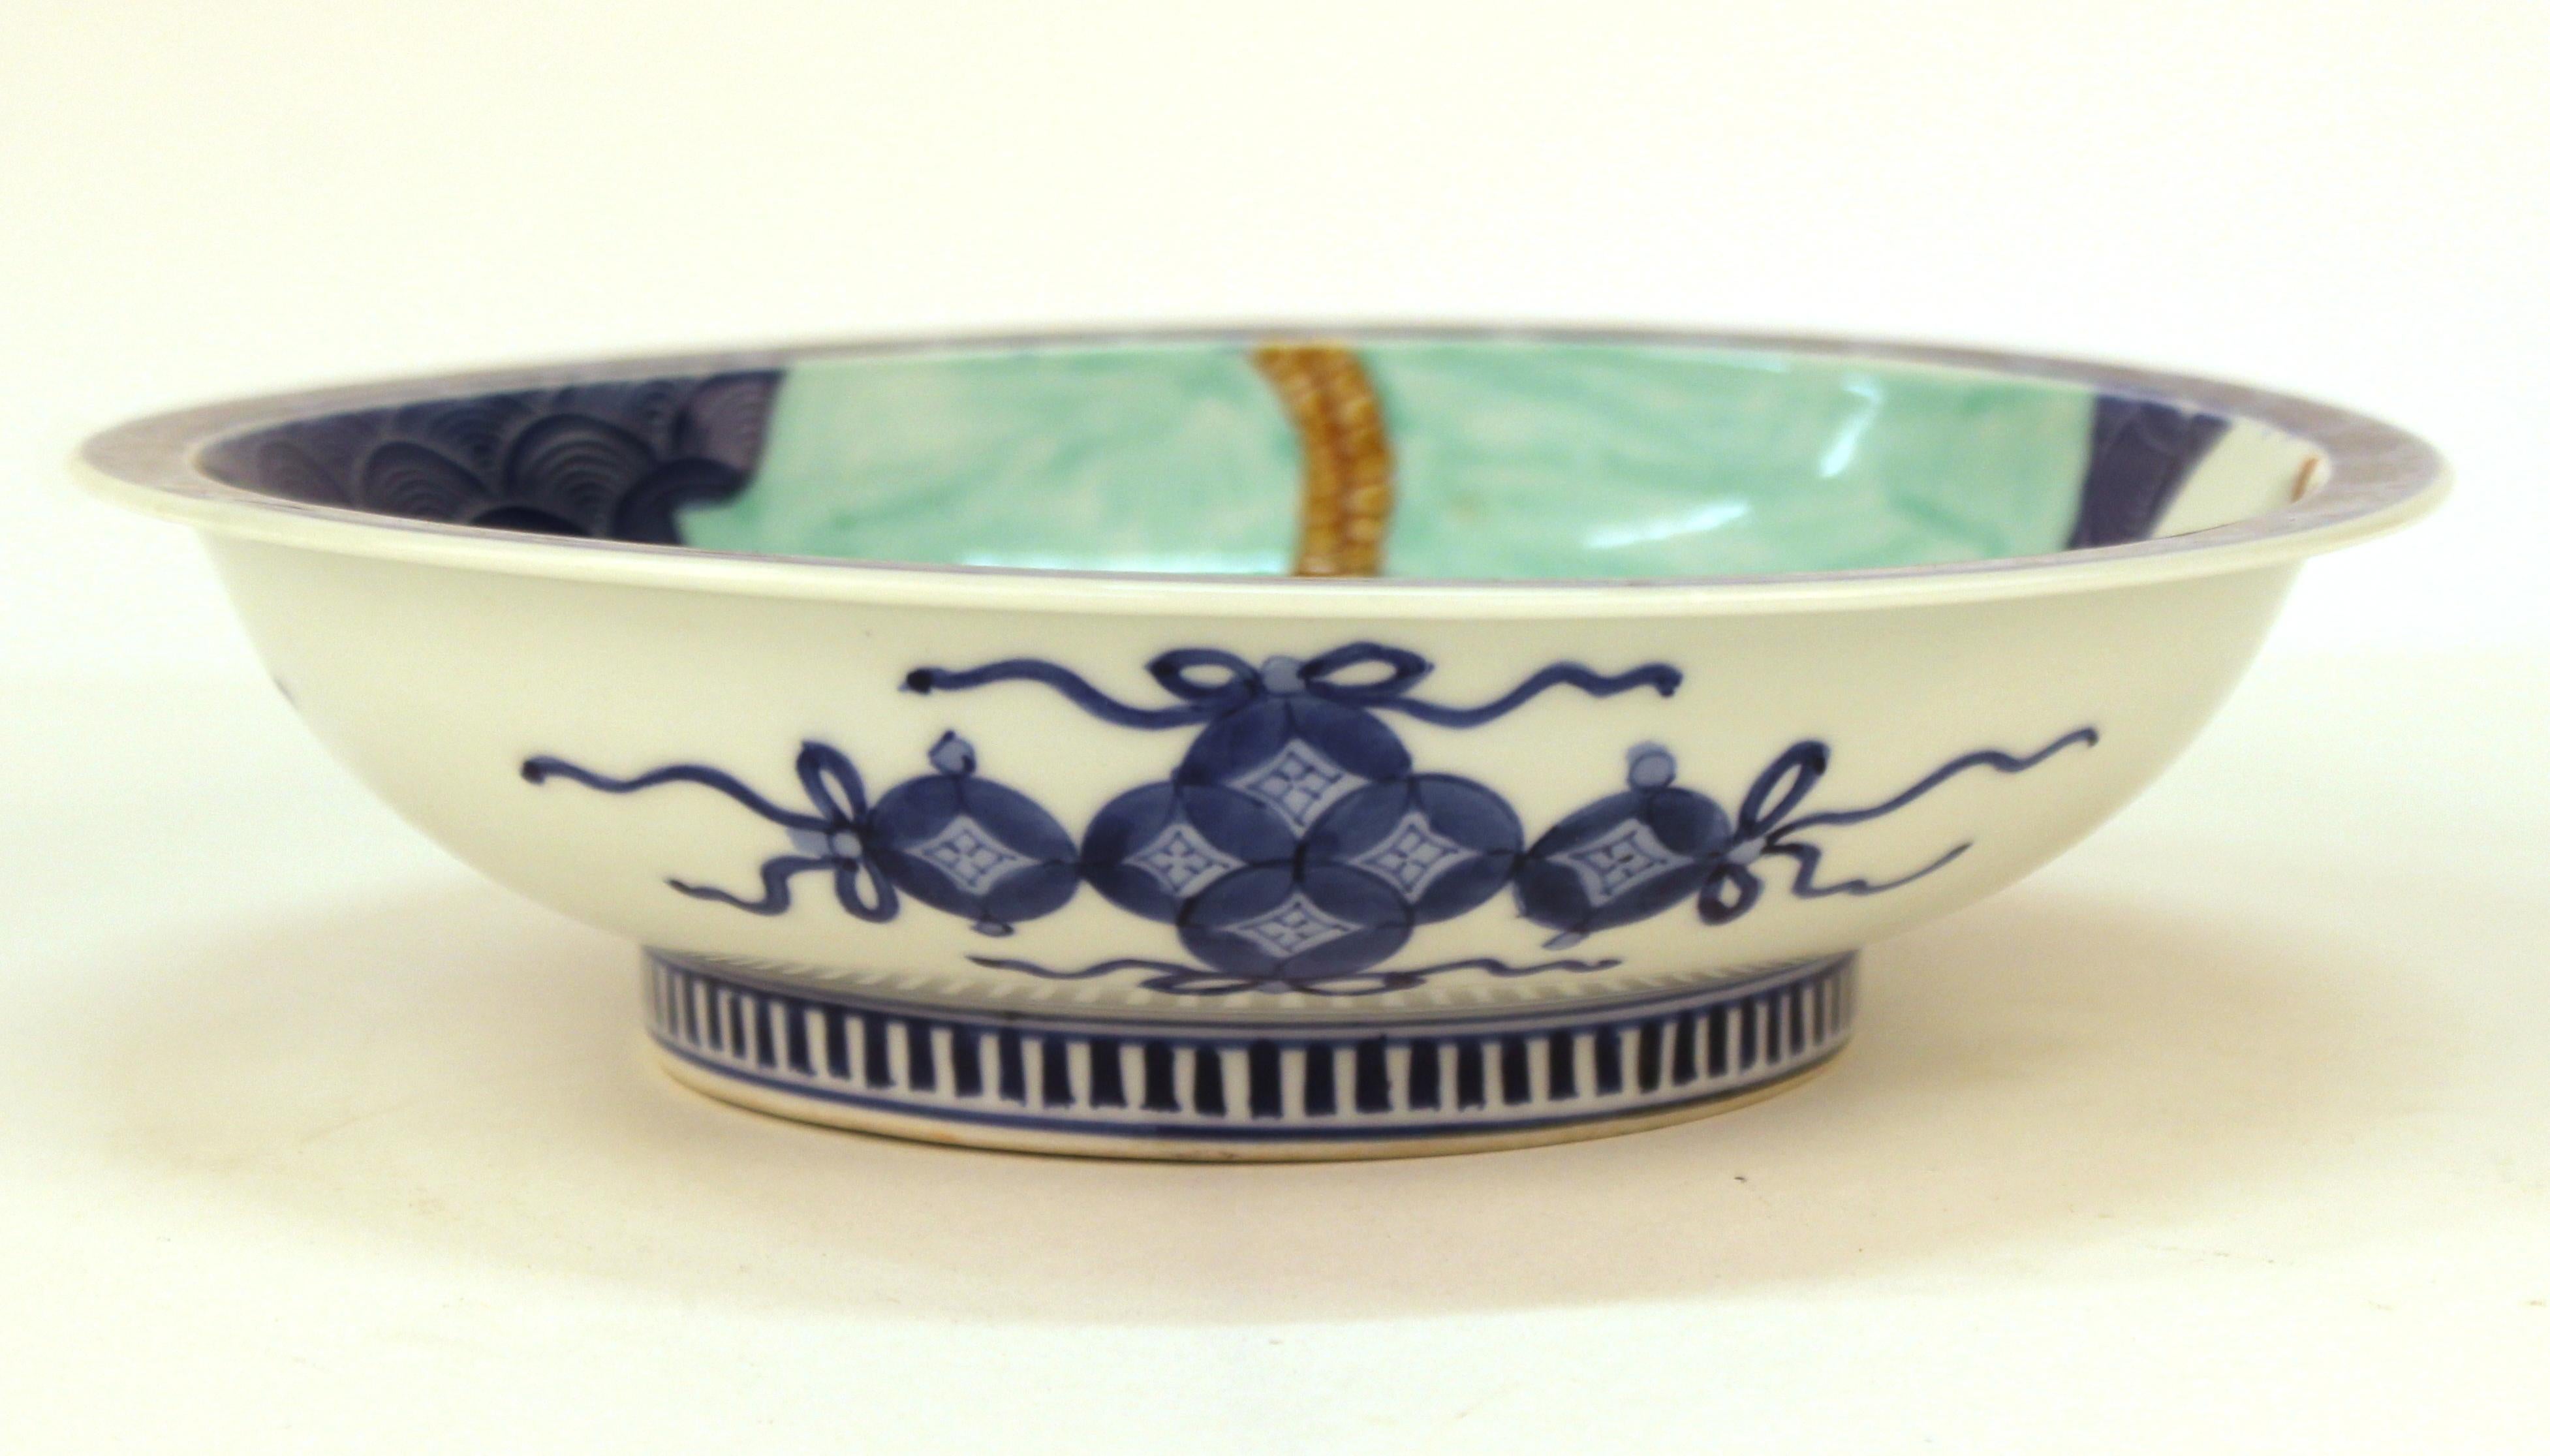 Japanese Edo period Nabashima porcelain blue plate with a motif of three sake bottles on a background of blue waves. The piece dates from the mid-19th century and is in great condition.
A similar example was sold at Christies from the collection of